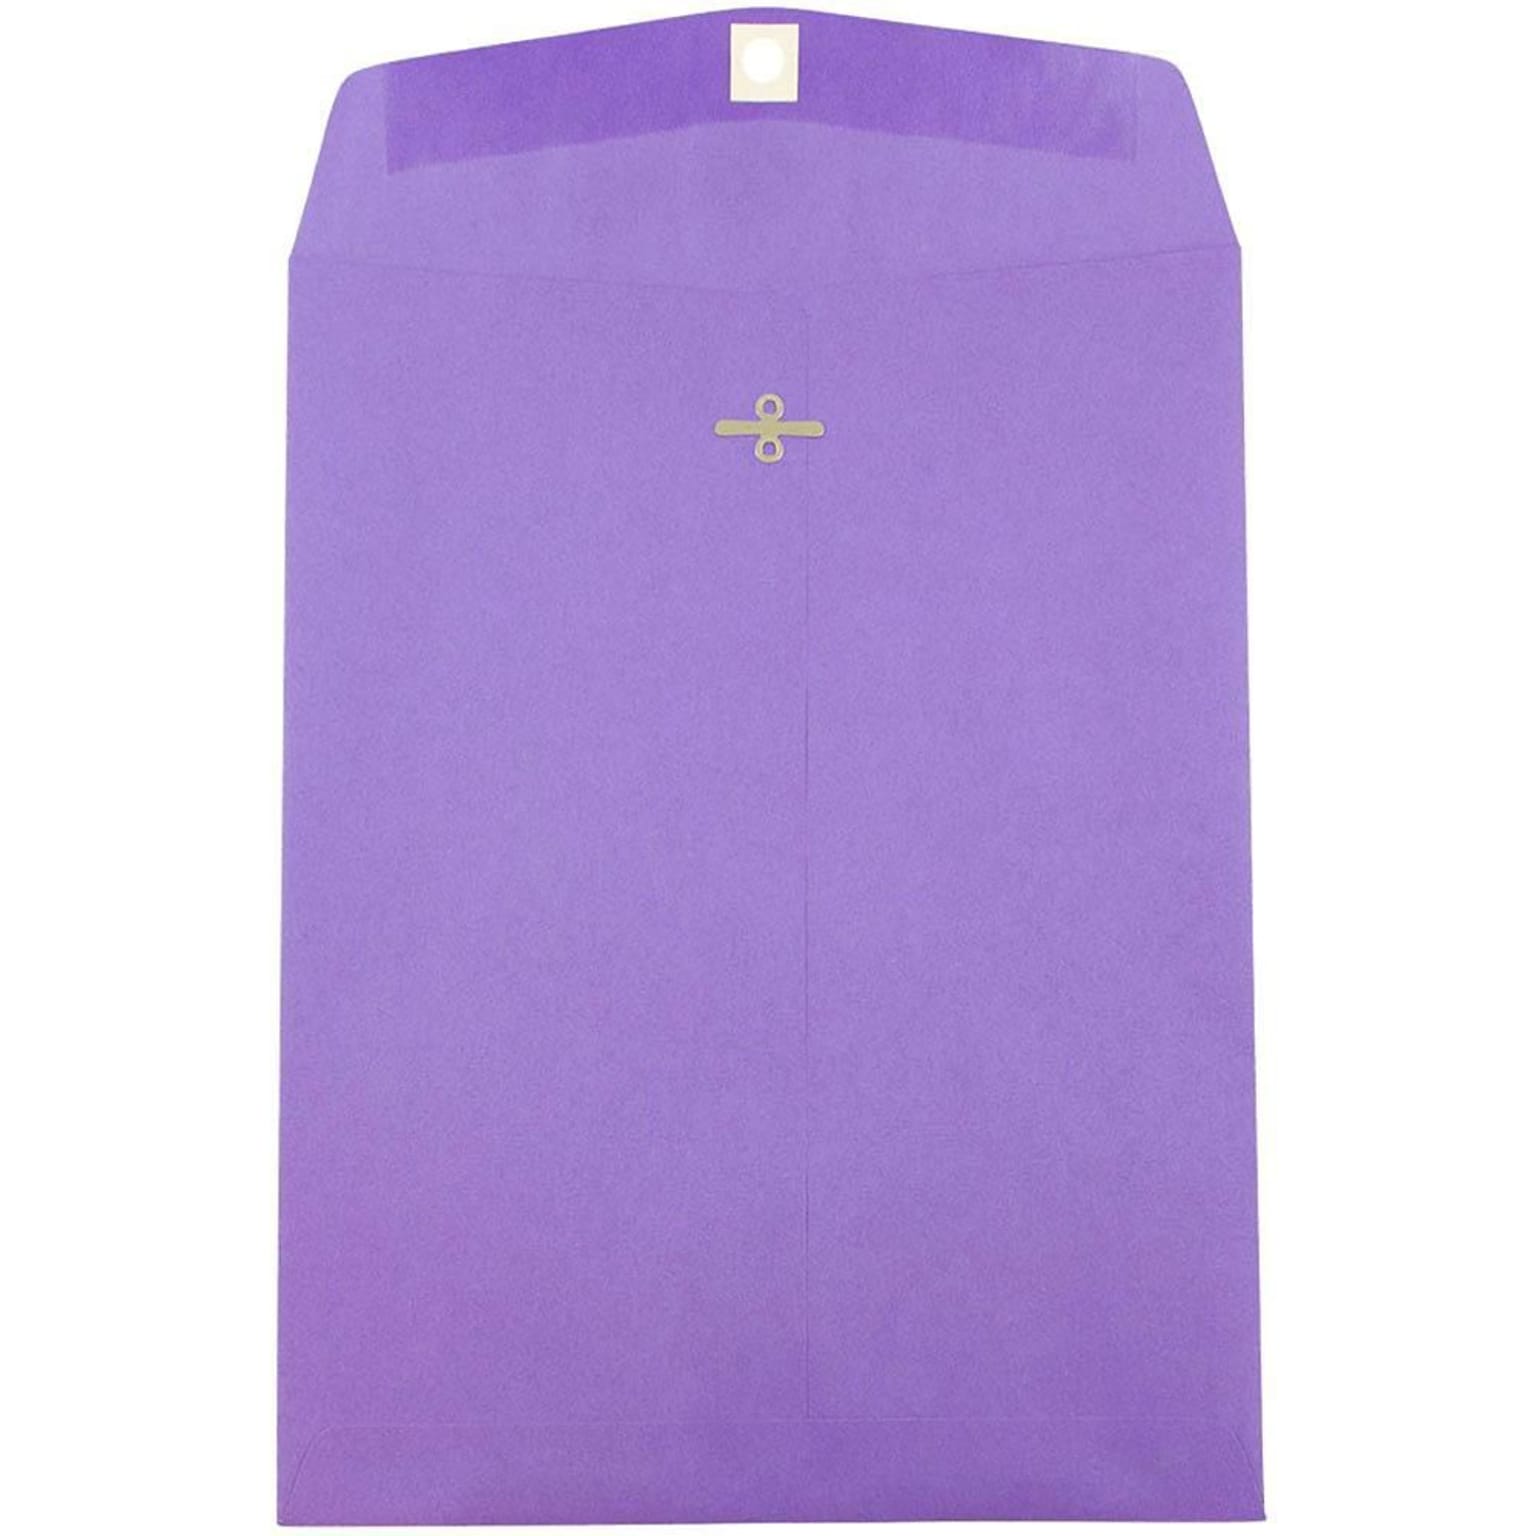 JAM Paper 10 x 13 Open End Catalog Colored Envelopes with Clasp Closure, Violet Purple Recycled, 50/Pack (v0128182i)